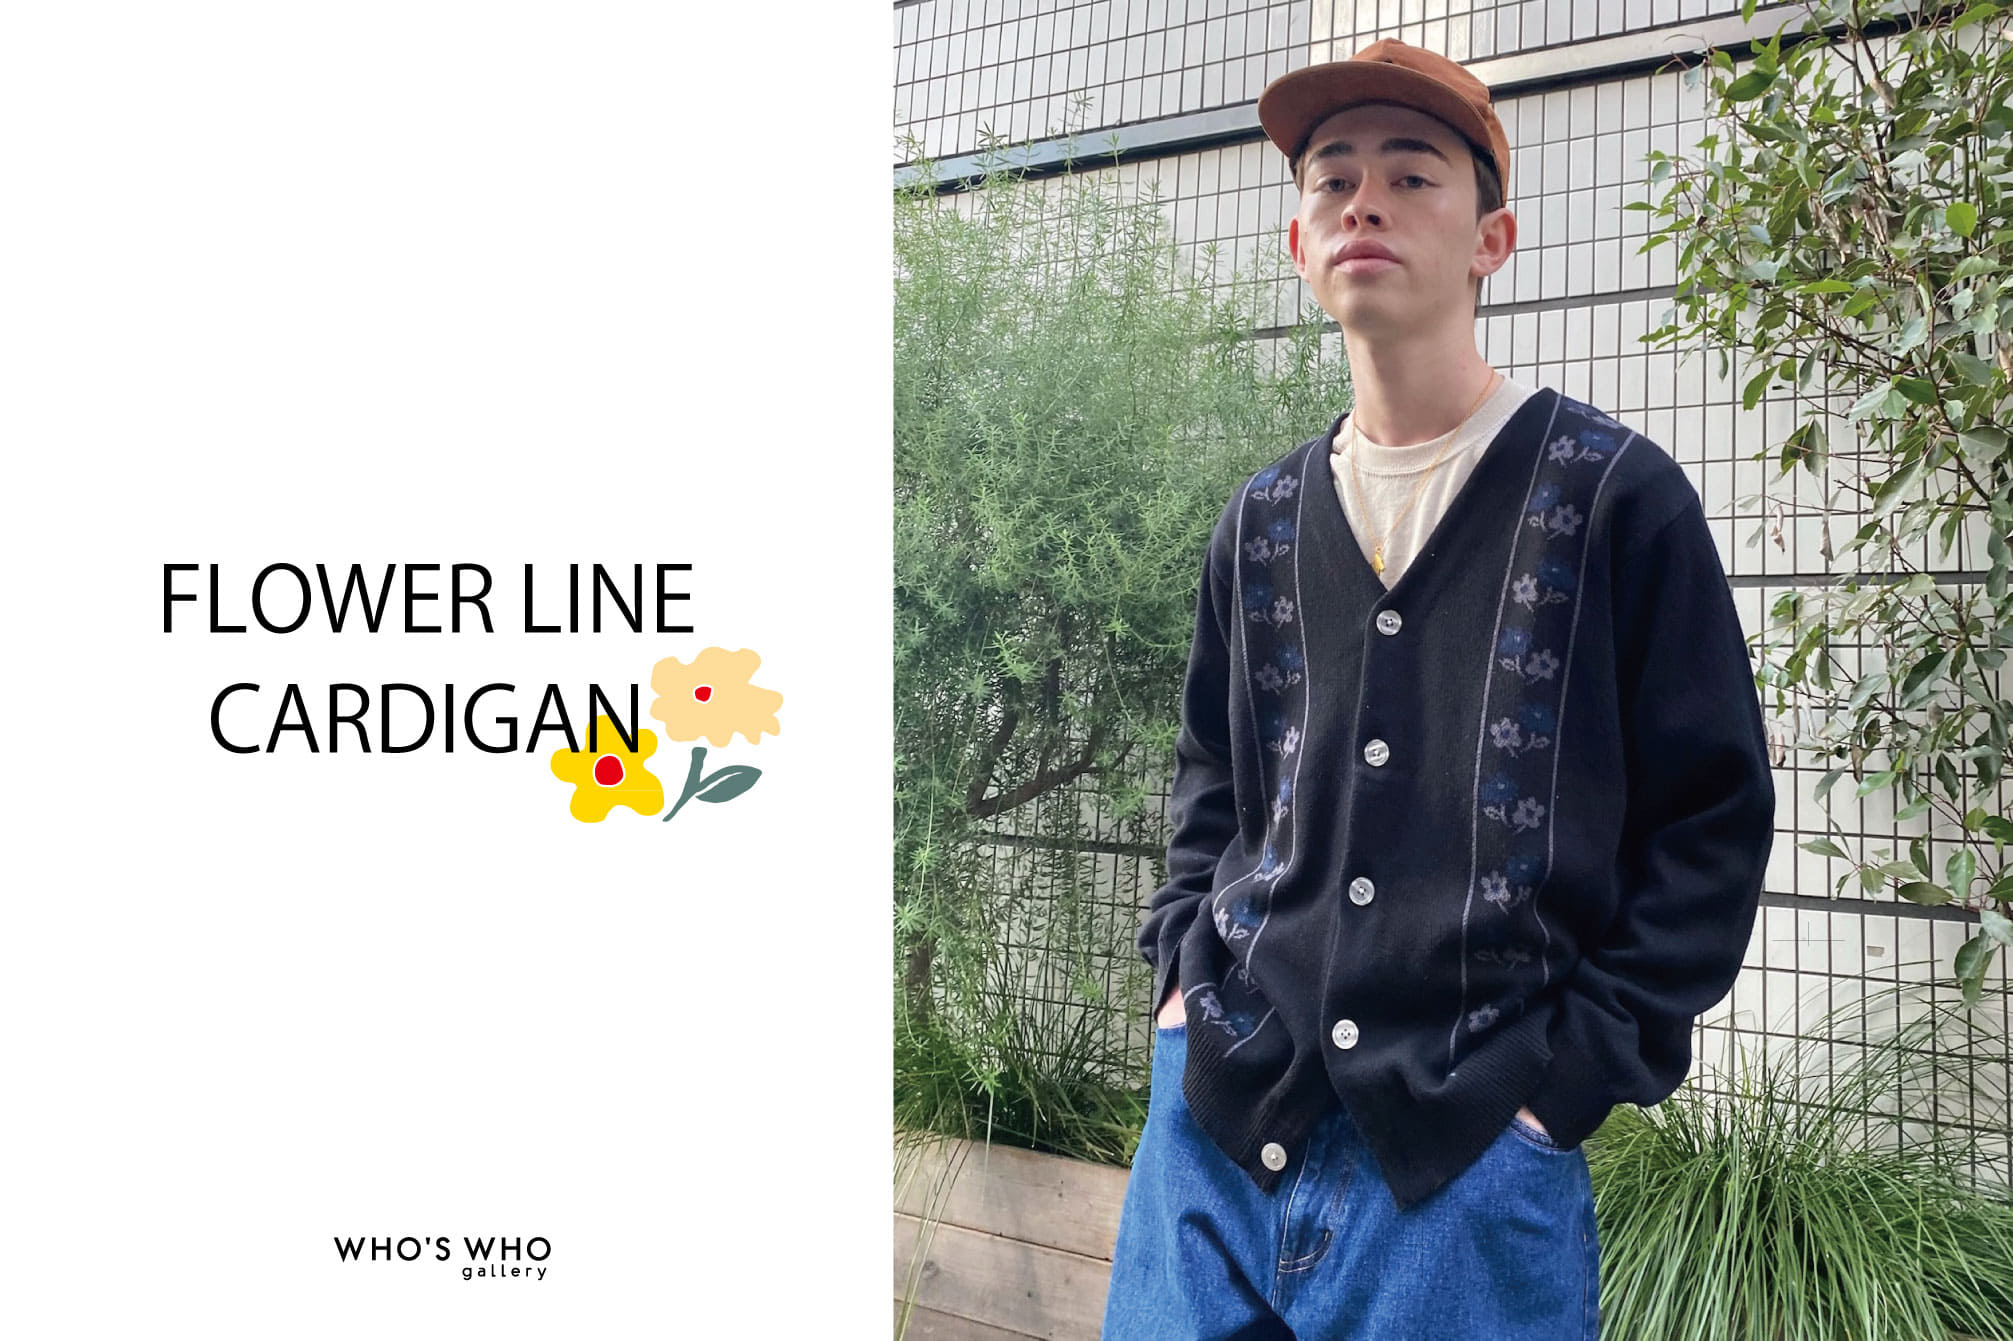 WHO’S WHO gallery 【FLOWER LINE CARDIGAN】